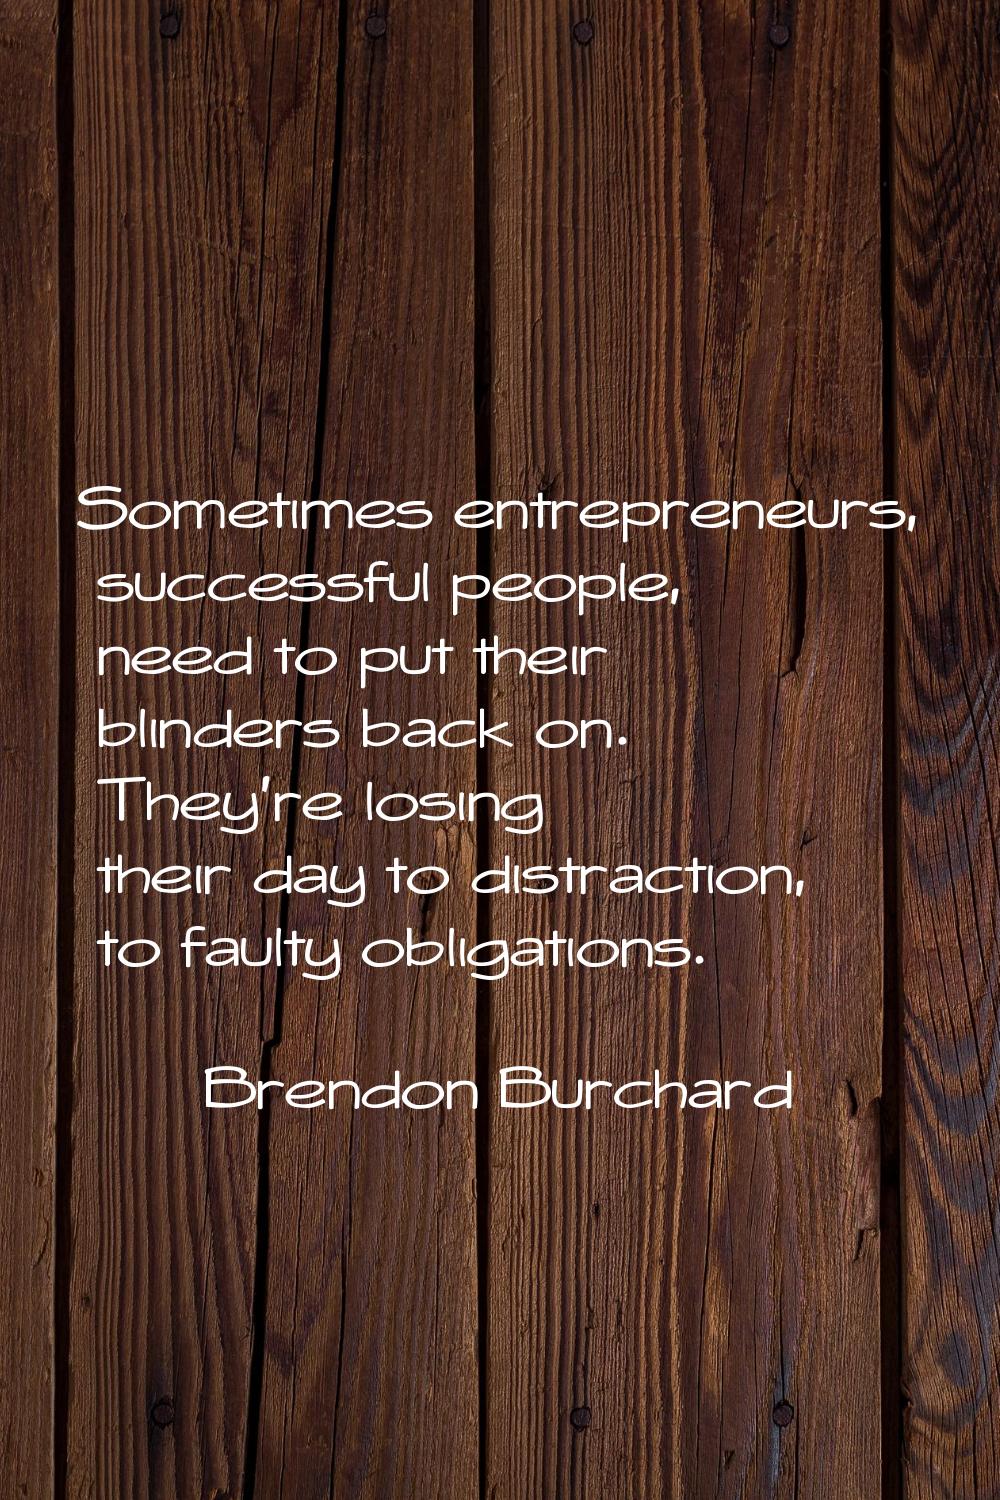 Sometimes entrepreneurs, successful people, need to put their blinders back on. They're losing thei